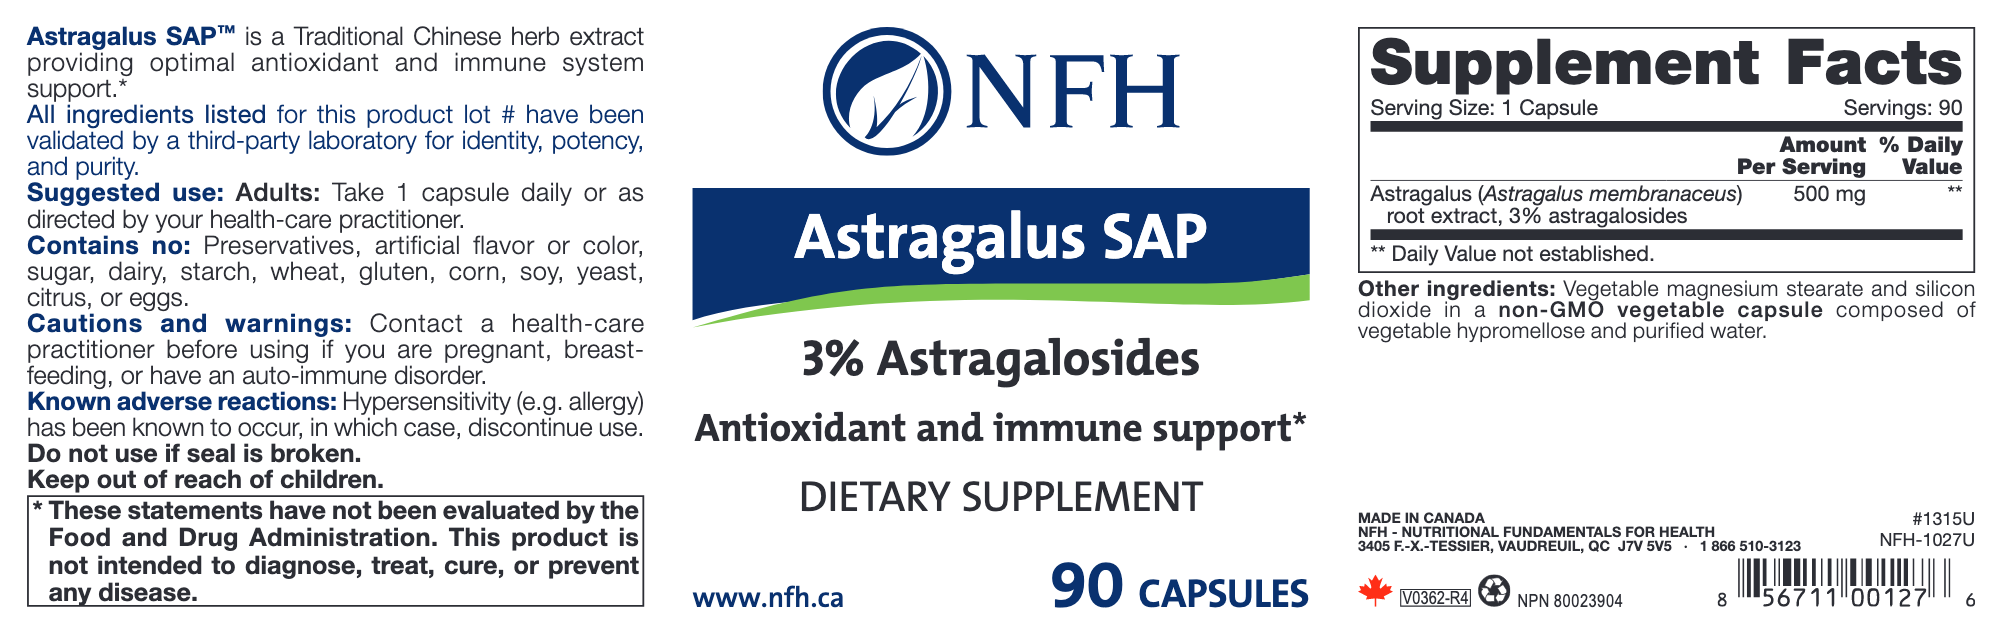 Astragalus SAP (90 Capsules)-Vitamins & Supplements-Nutritional Fundamentals for Health (NFH)-Pine Street Clinic